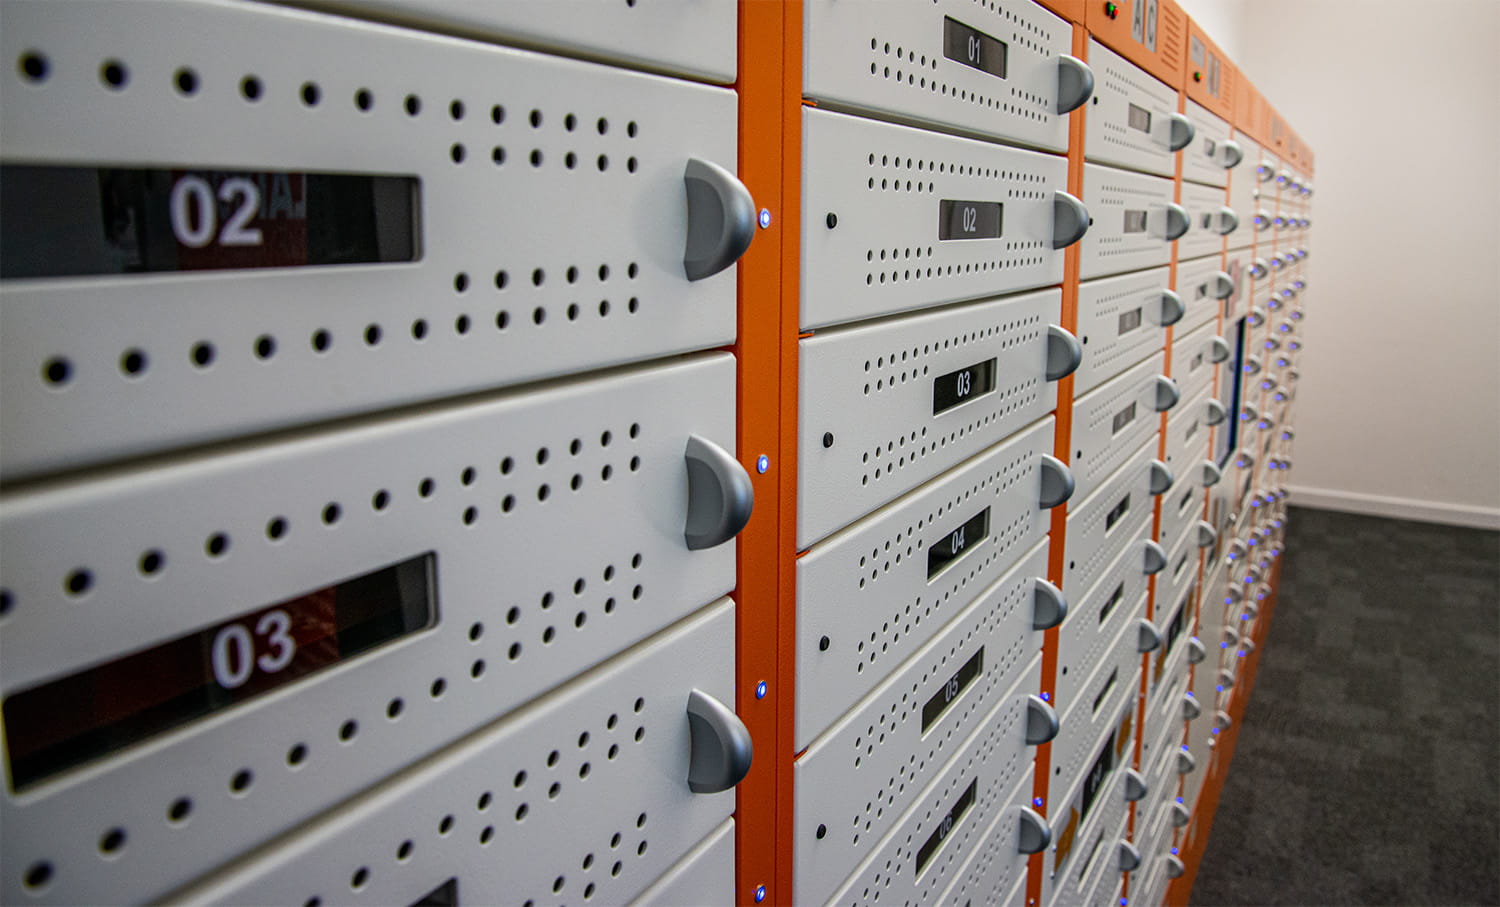 the laptop loans lockers at the Colchester campus library